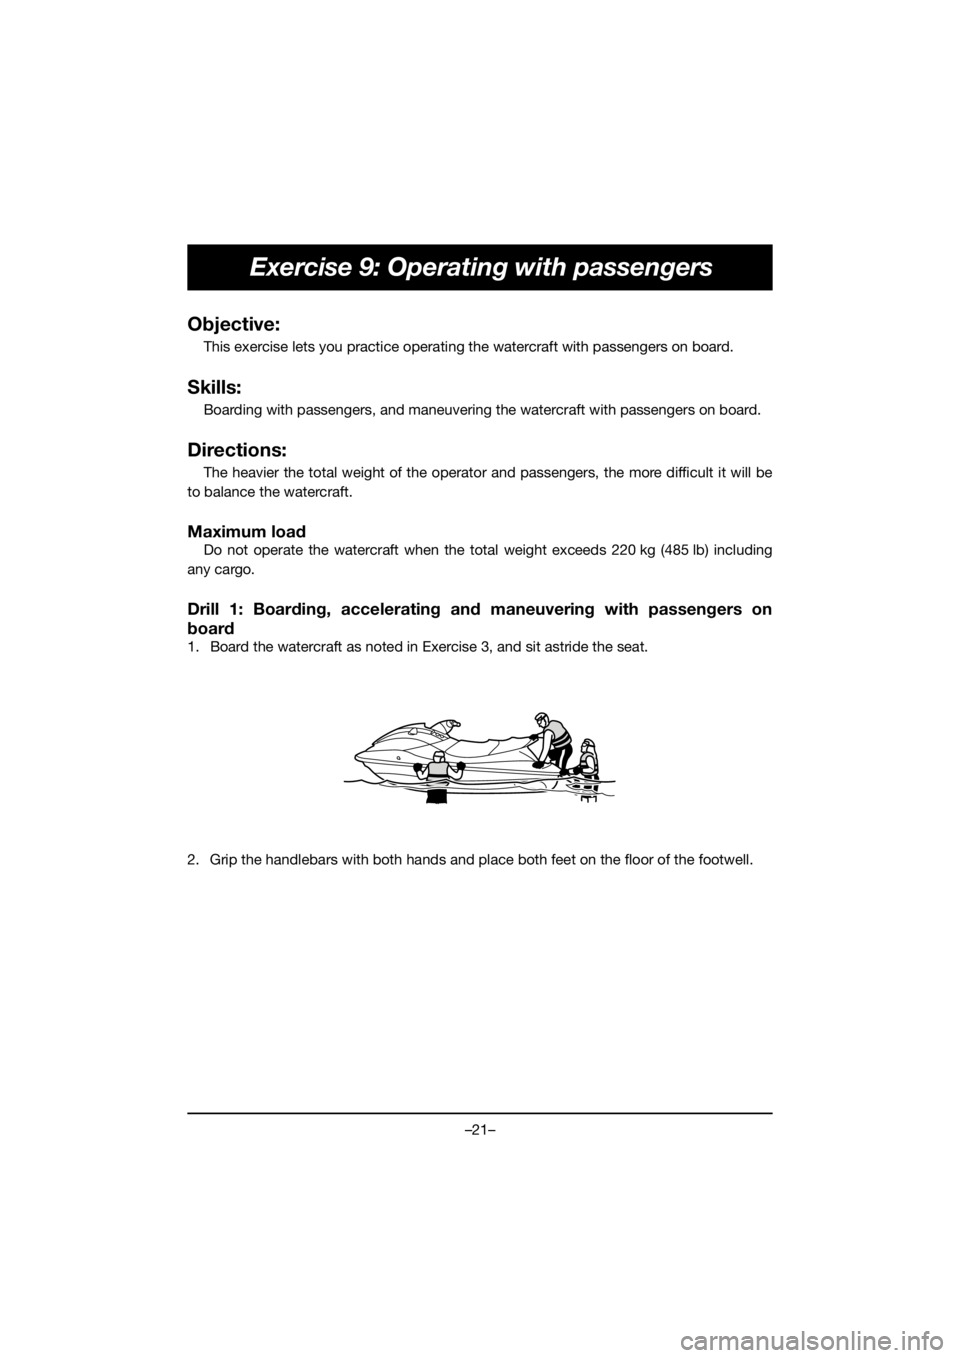 YAMAHA EX SPORT 2020  Manuale duso (in Italian) –21–
Exercise 9: Operating with passengers
Objective:
This exercise lets you practice operating the watercraft with passengers on board.
Skills:
Boarding with passengers, and maneuvering the water